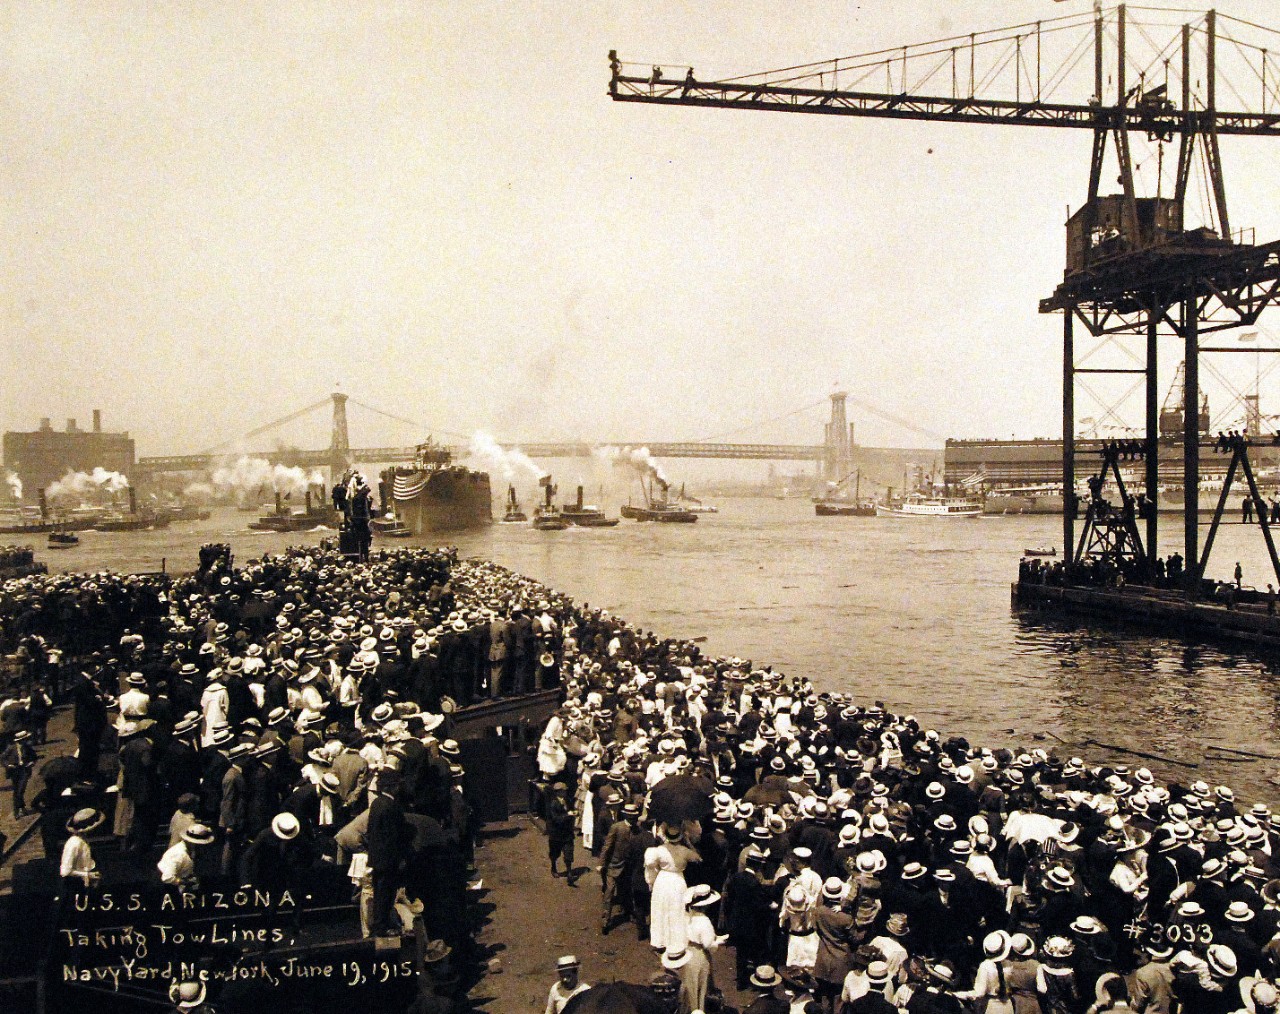 <p>19-LC-19A-25: USS Arizona (BB 39), taking the tow lines during launching at New York Navy Yard, New York City, June 19, 1915.&nbsp;</p>
